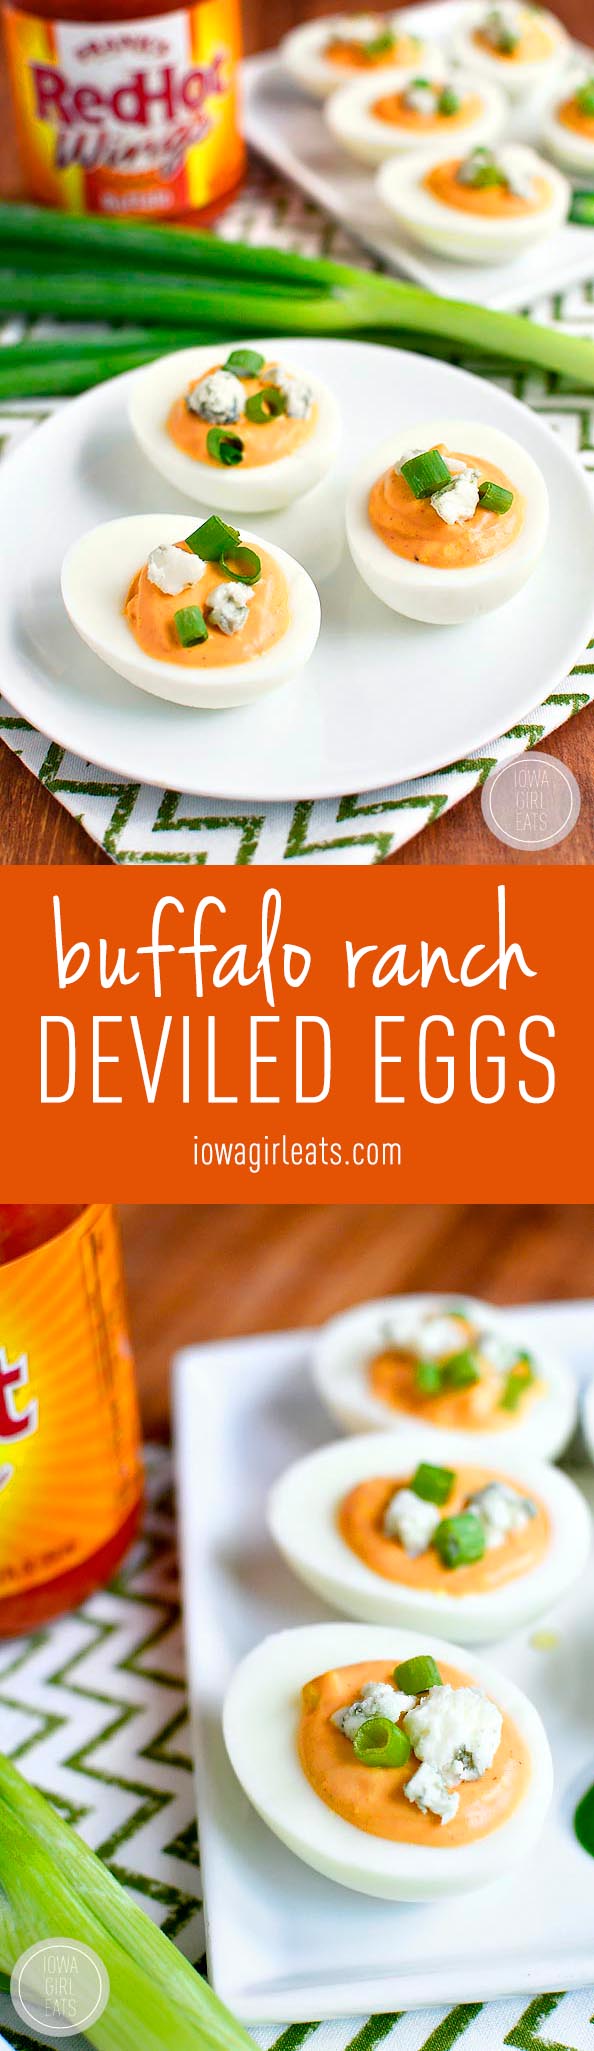 Buffalo Ranch Deviled Eggs are truly devilish-tasting thanks to spicy buffalo wing sauce and cooling ranch dressing in the mix! #glutenfree | iowagirleats.com